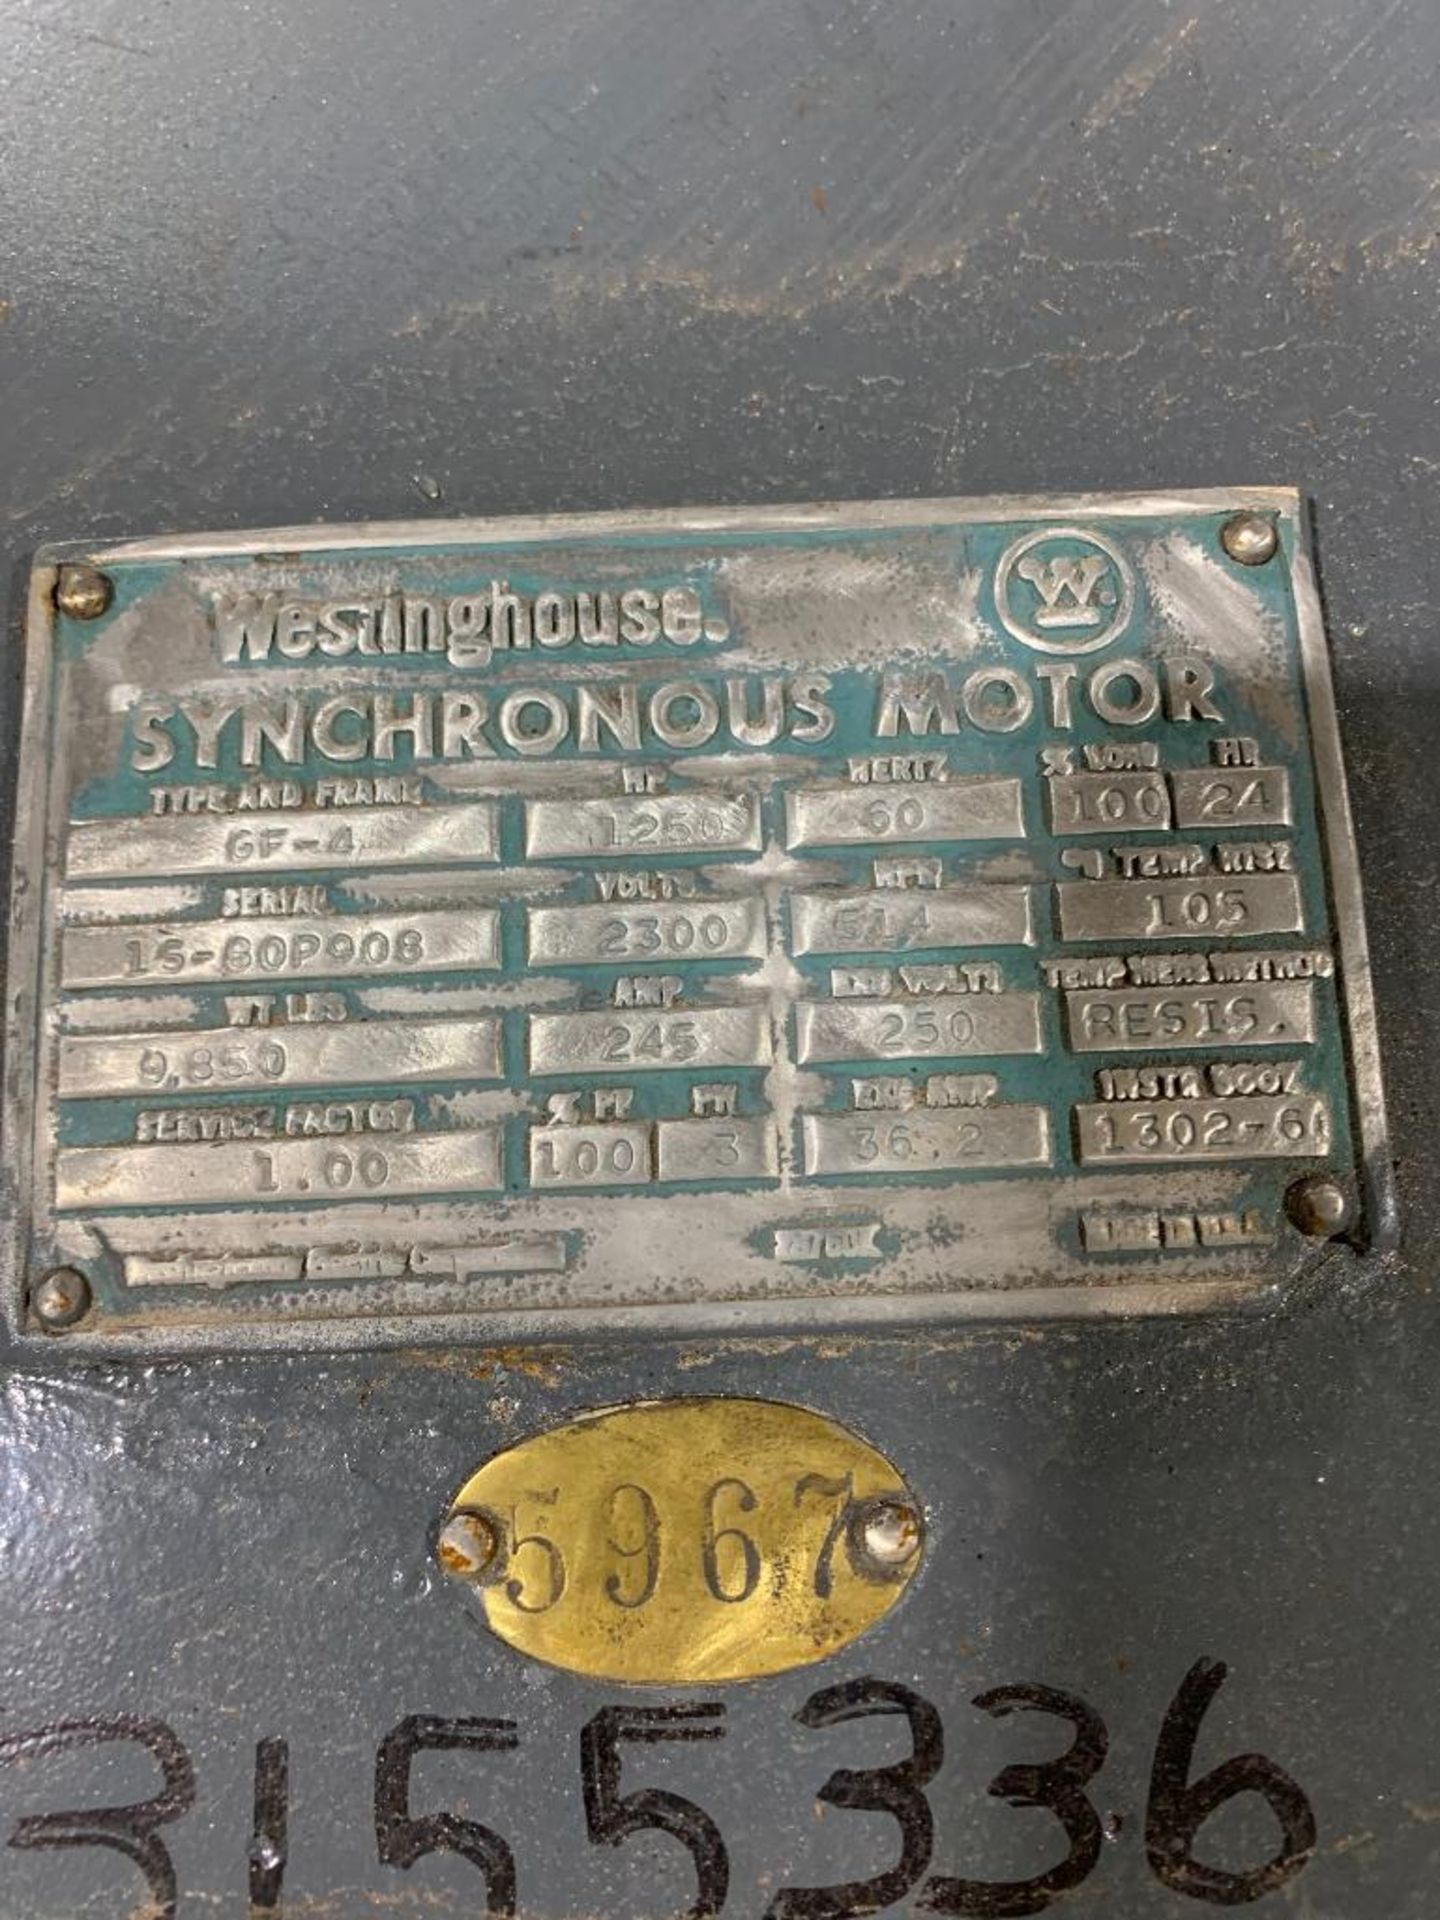 Westinghouse 1250-HP Synchronous Motor, 514 RPM, 2300 V, 3 PH, FR: GF4 - Image 9 of 9